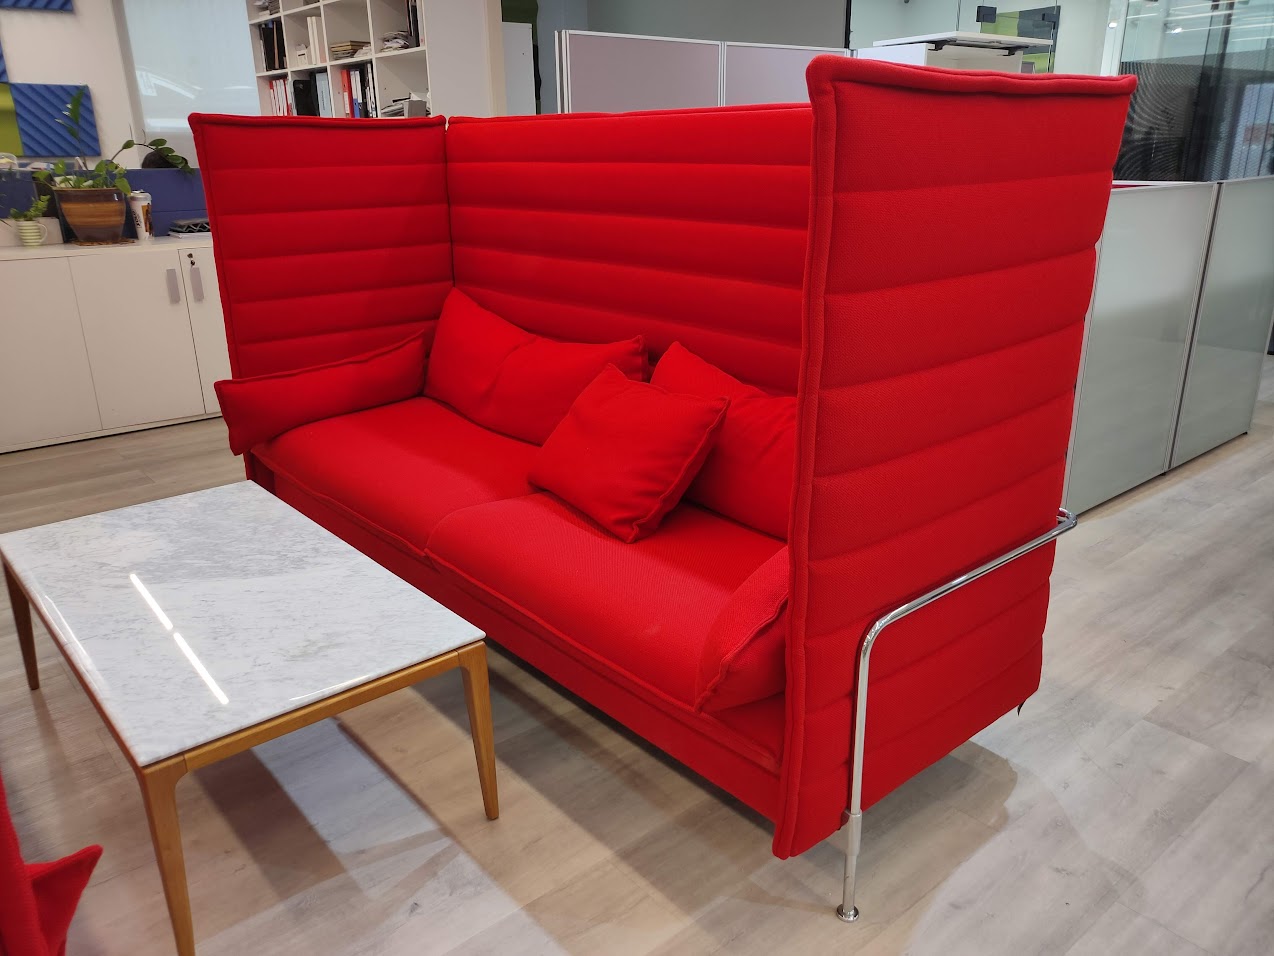 Alcove 3-Seater Highback Sofa from Vitra, Switzerland Consumer KANO Red W2390 x D860 x H1360mm 2-5 Working Days